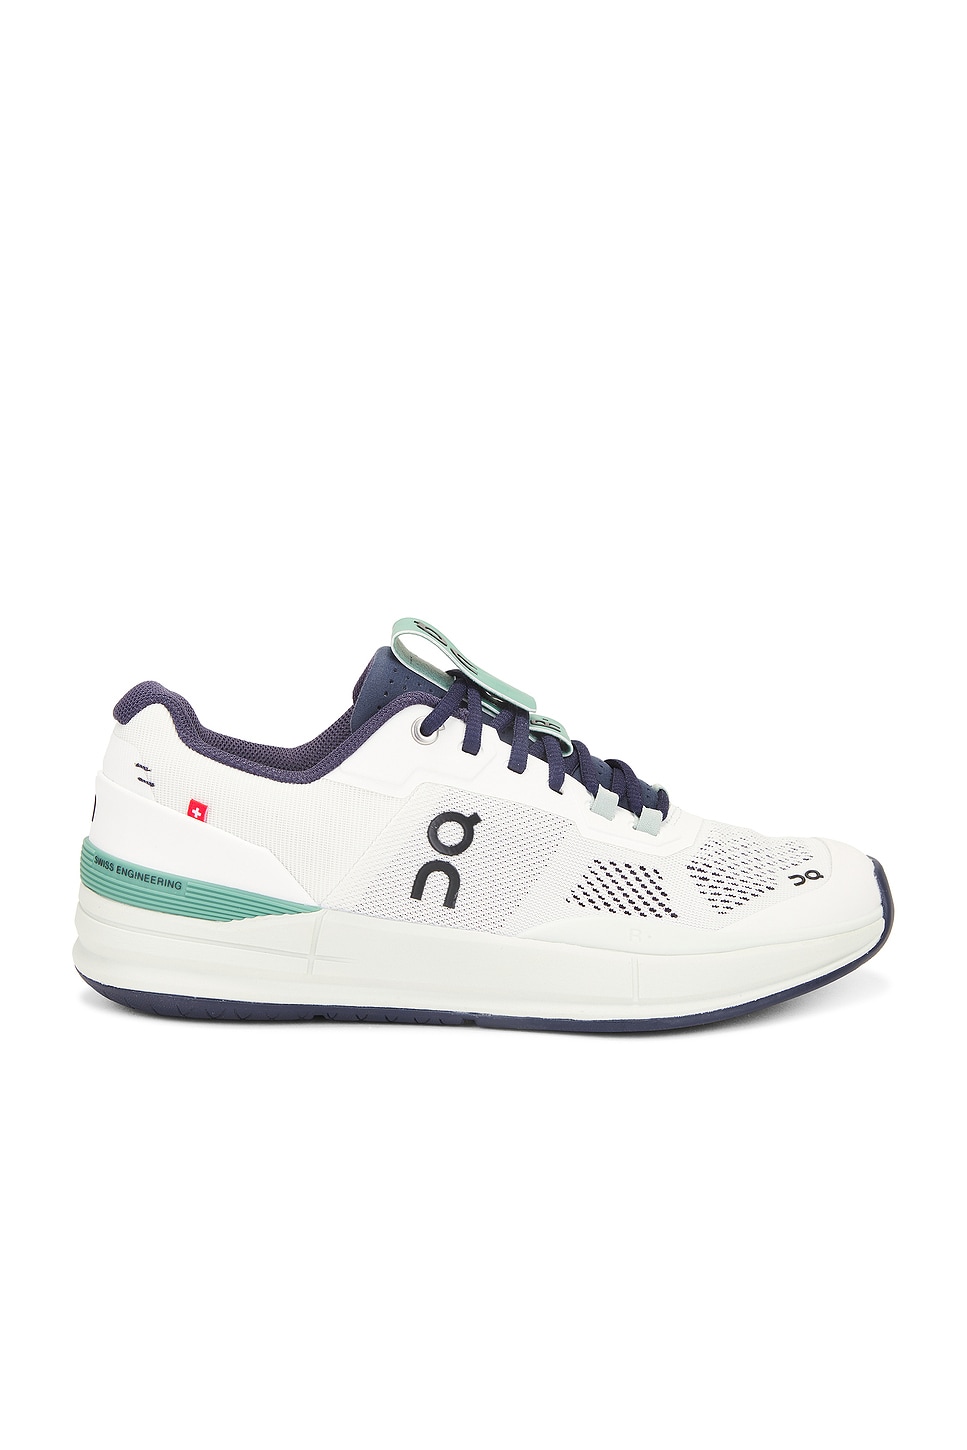 Image 1 of On The Roger Pro Sneaker in Undyed White & Aloe